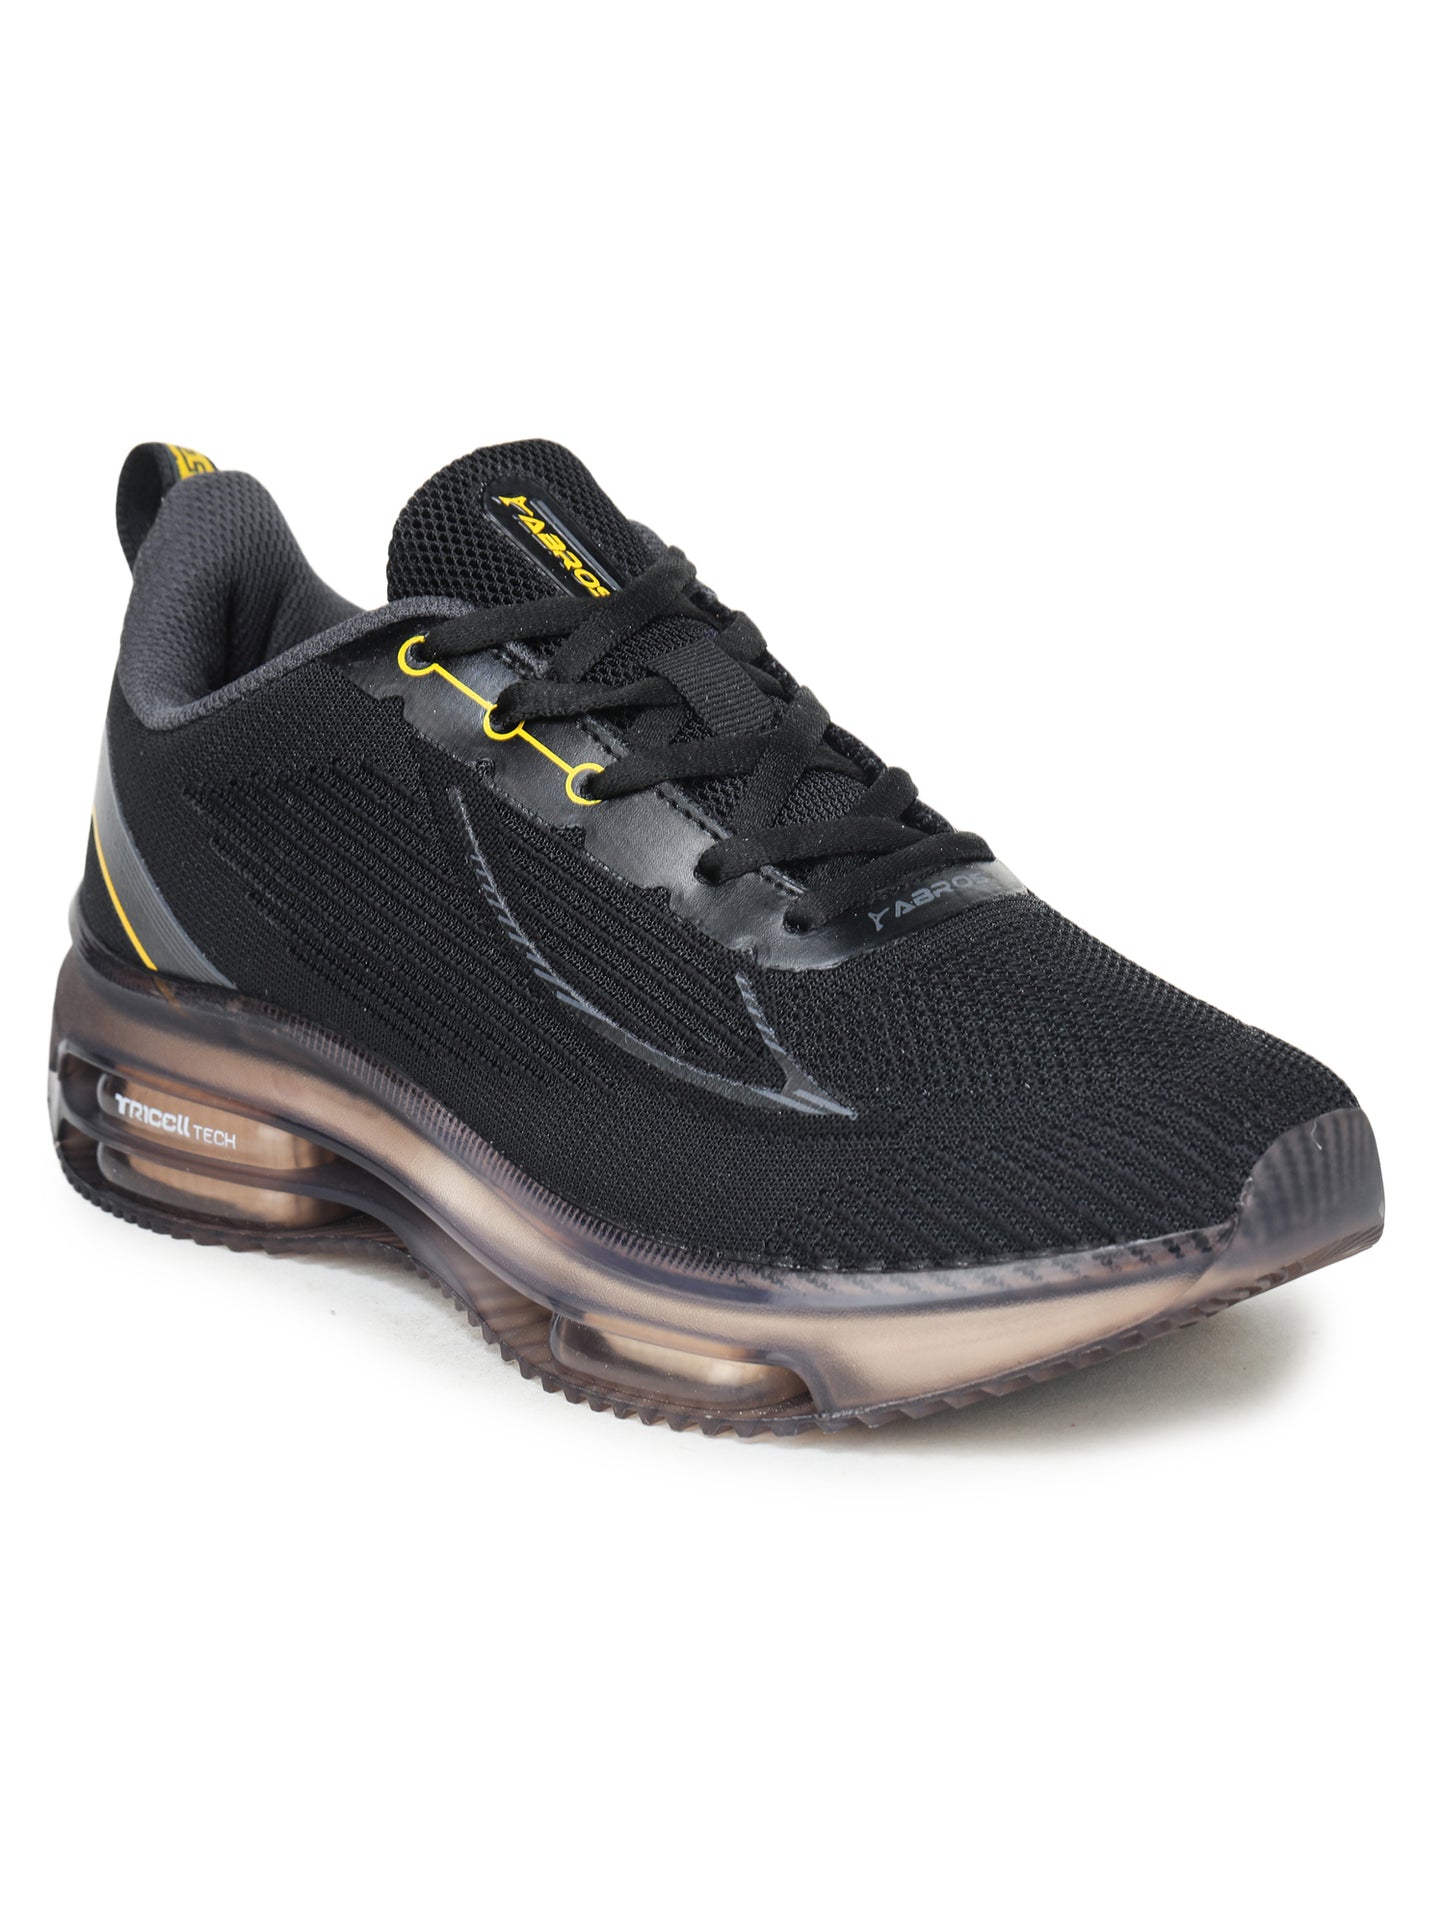 ABROS Courage Sports Shoes For Men